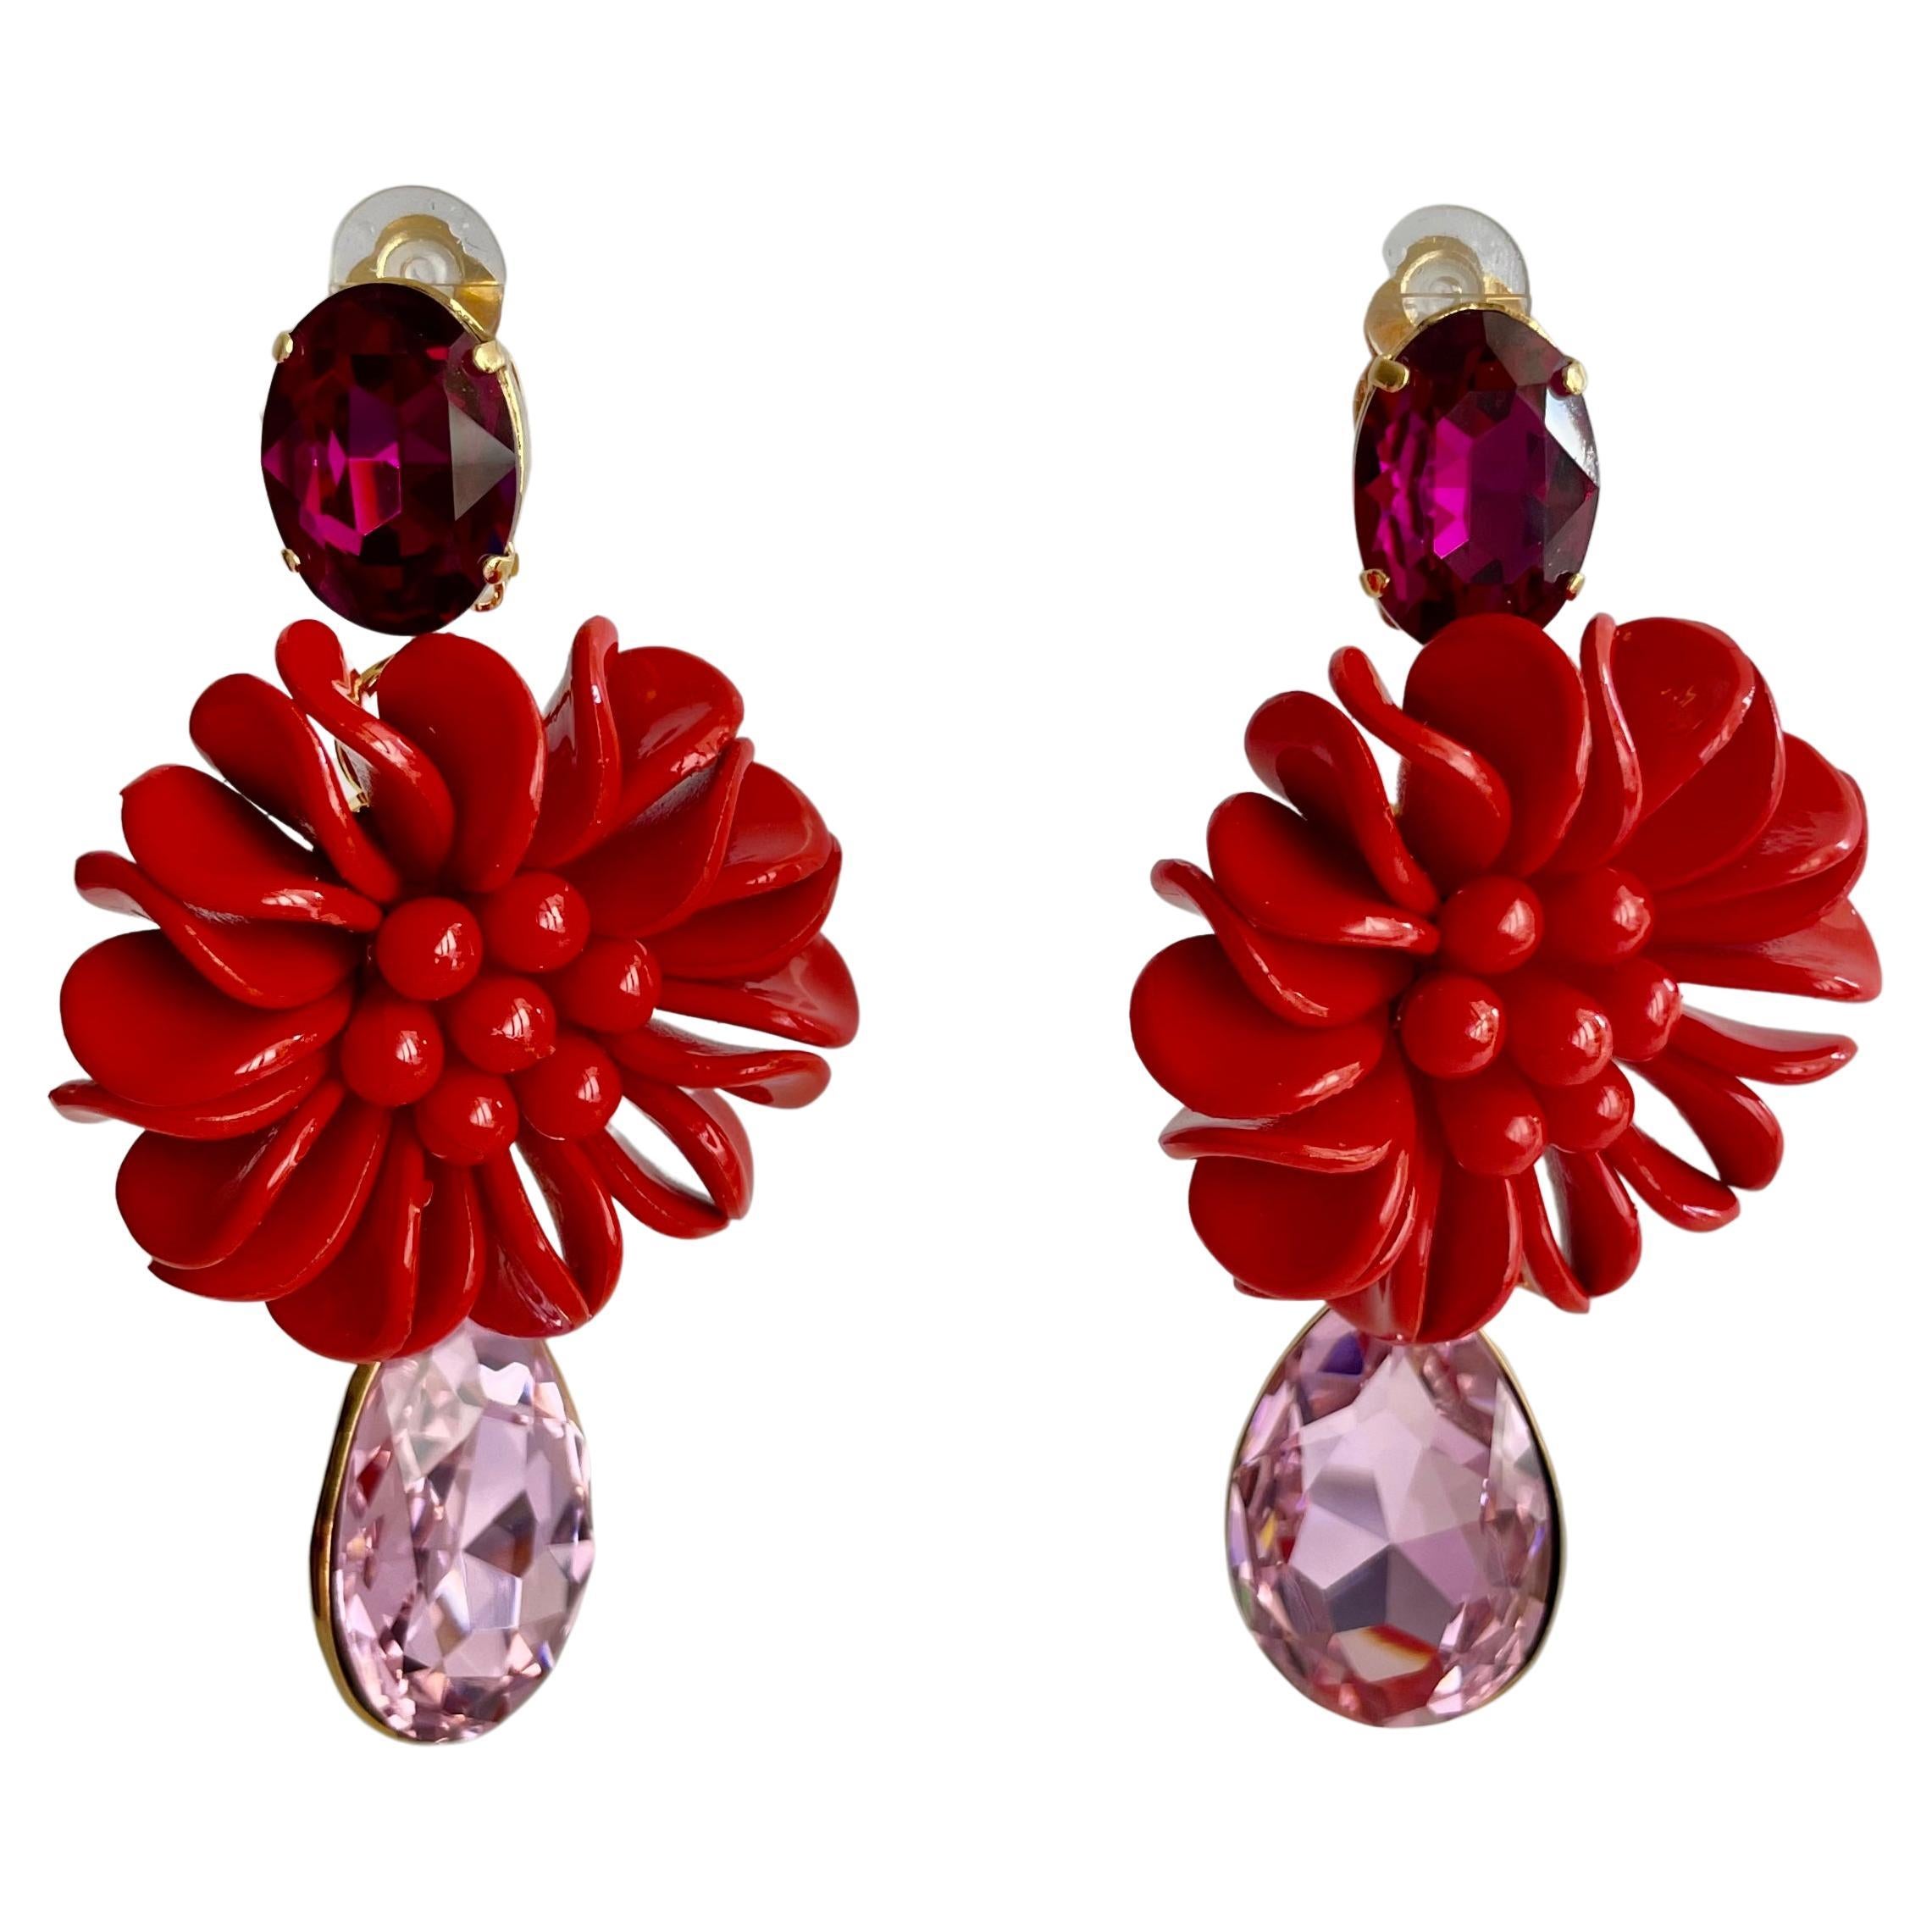 Statement earrings with Swarovski Crystal and molded resin flower.
Philippe Ferrandis, French luxury designer. His jewels are hand-made in his workshops in Paris, in the respect of an exceptional know-how.
He has been a parurier in Paris since 1986.